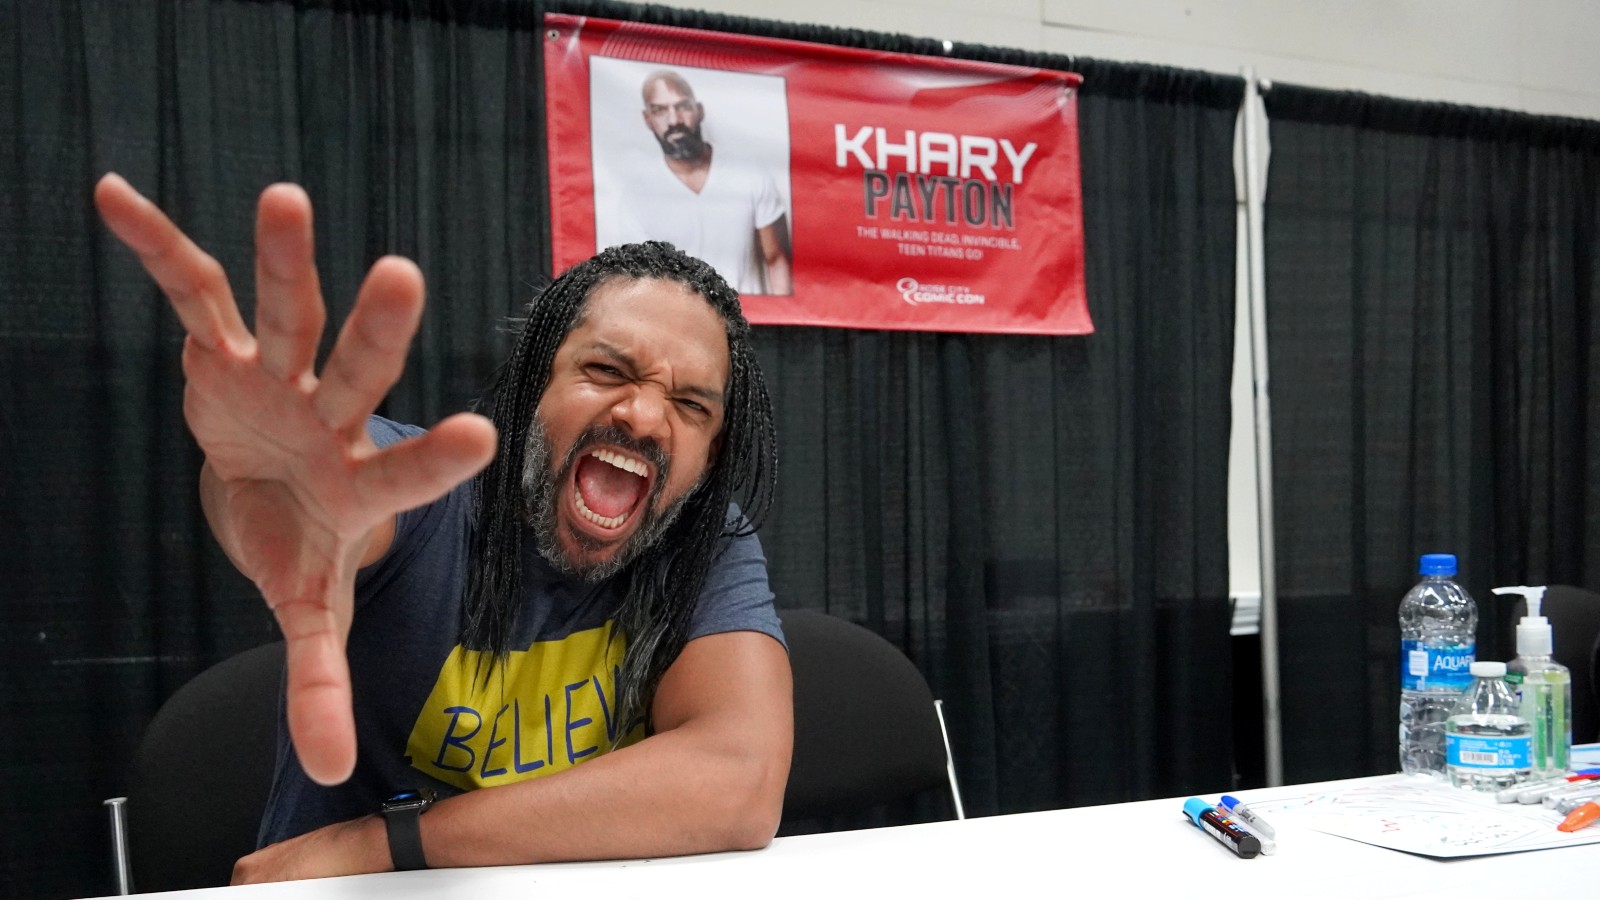 Khary Payton makes a dynamic pose into the camera while occupying a booth to greet fans at a comic con event.